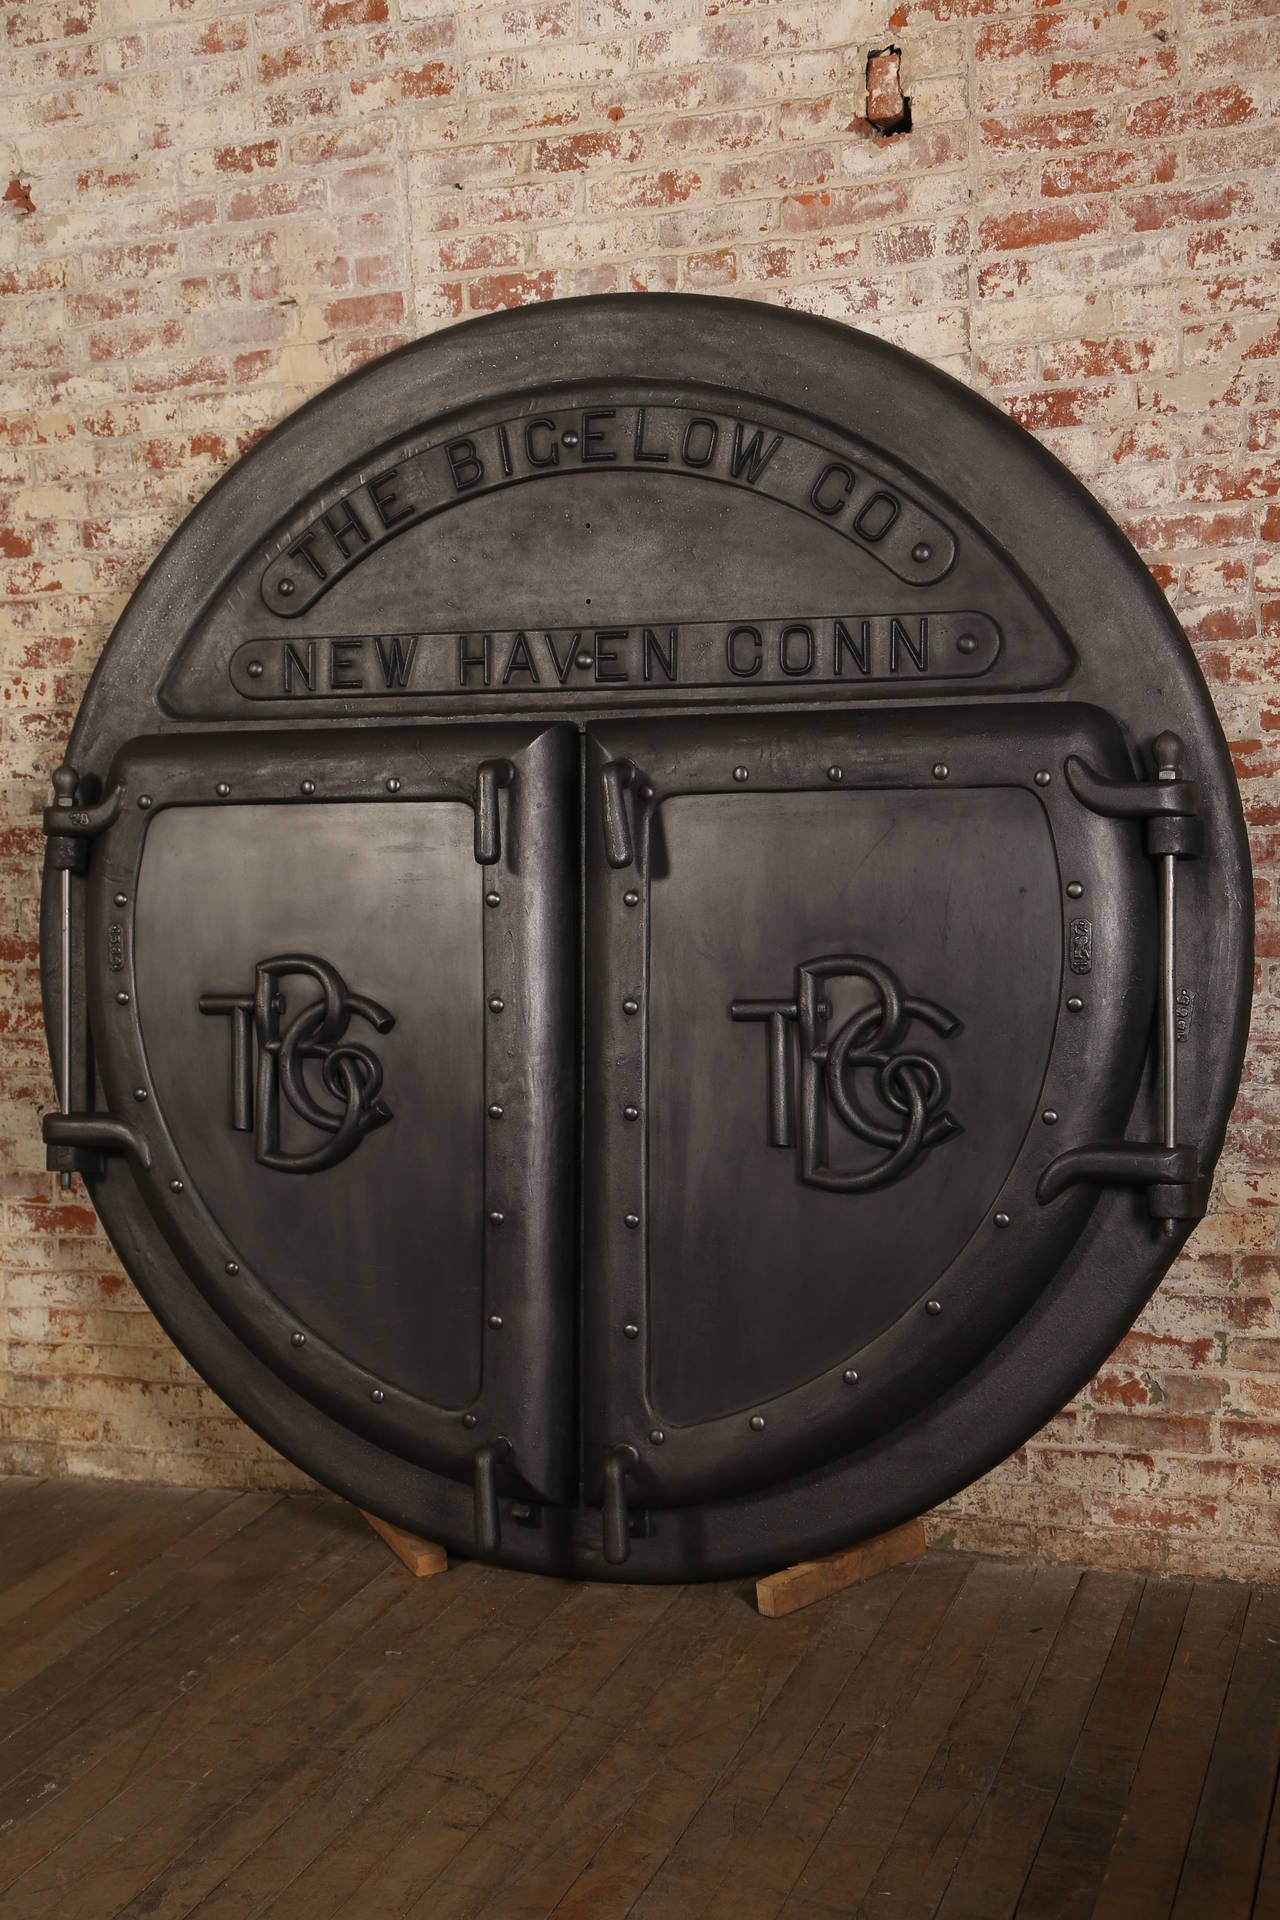 Outstanding Pair of 7' Foot Huge ' Vintage Industrial Cast Iron Boiler doors from the Bigelow Boiler Co. of New Haven, CT. 1924. Overall Dimensions are 85" in Diameter, 2 1/4" in Depth, 6" in Depth including Doors, and the Handles